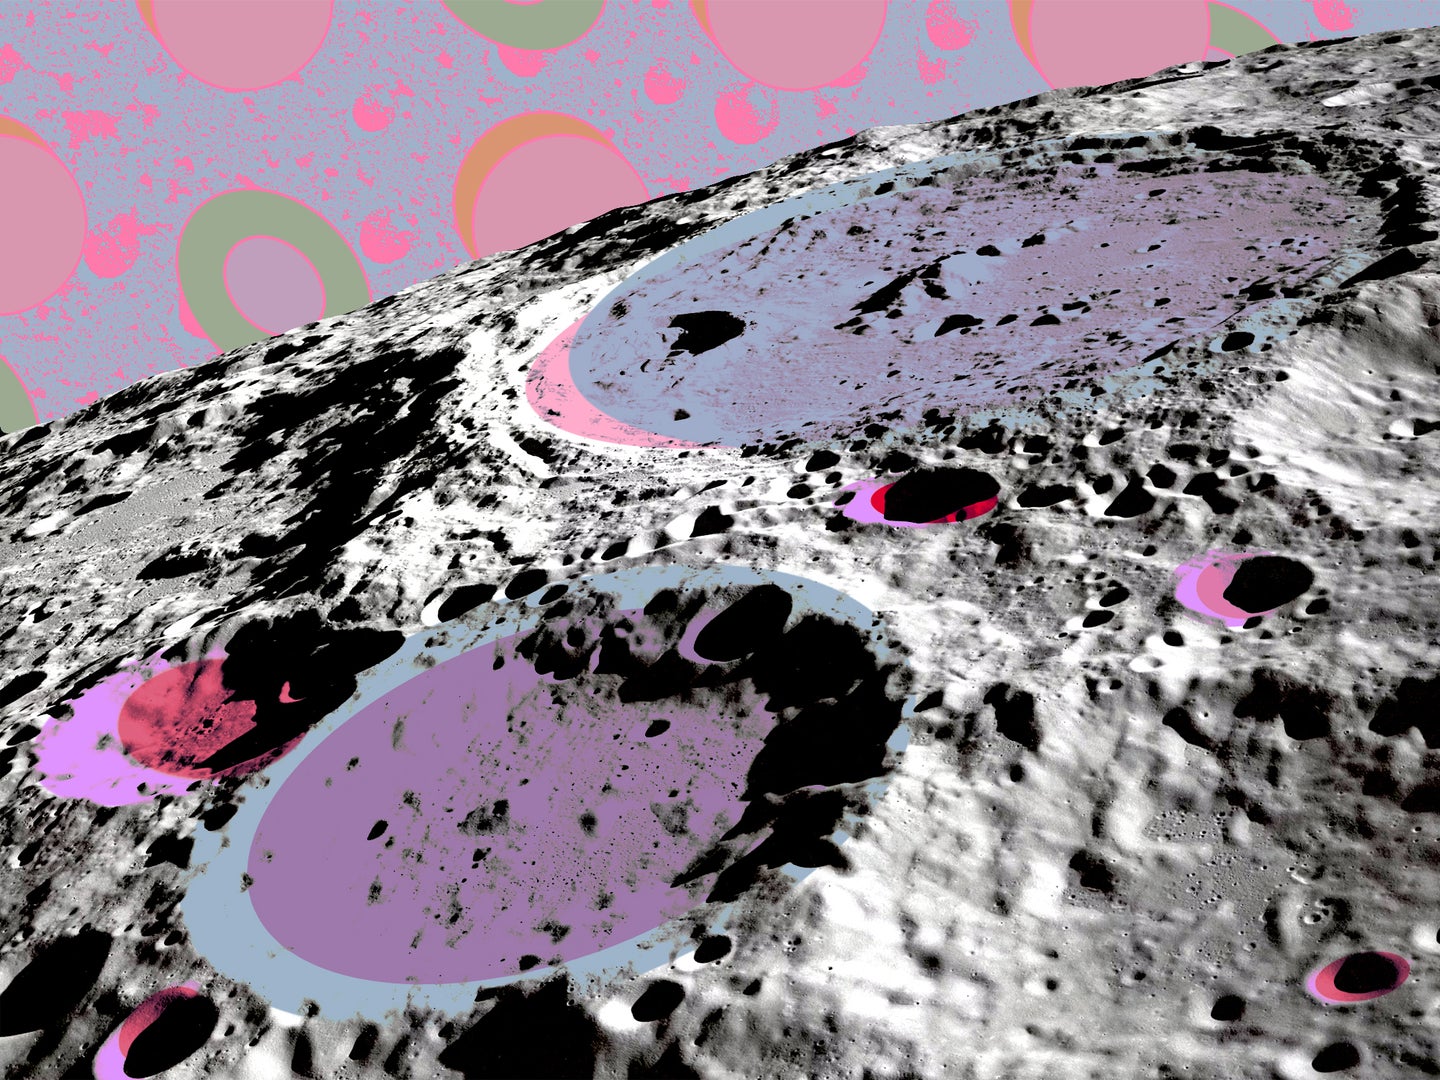 A colorful moon with craters.